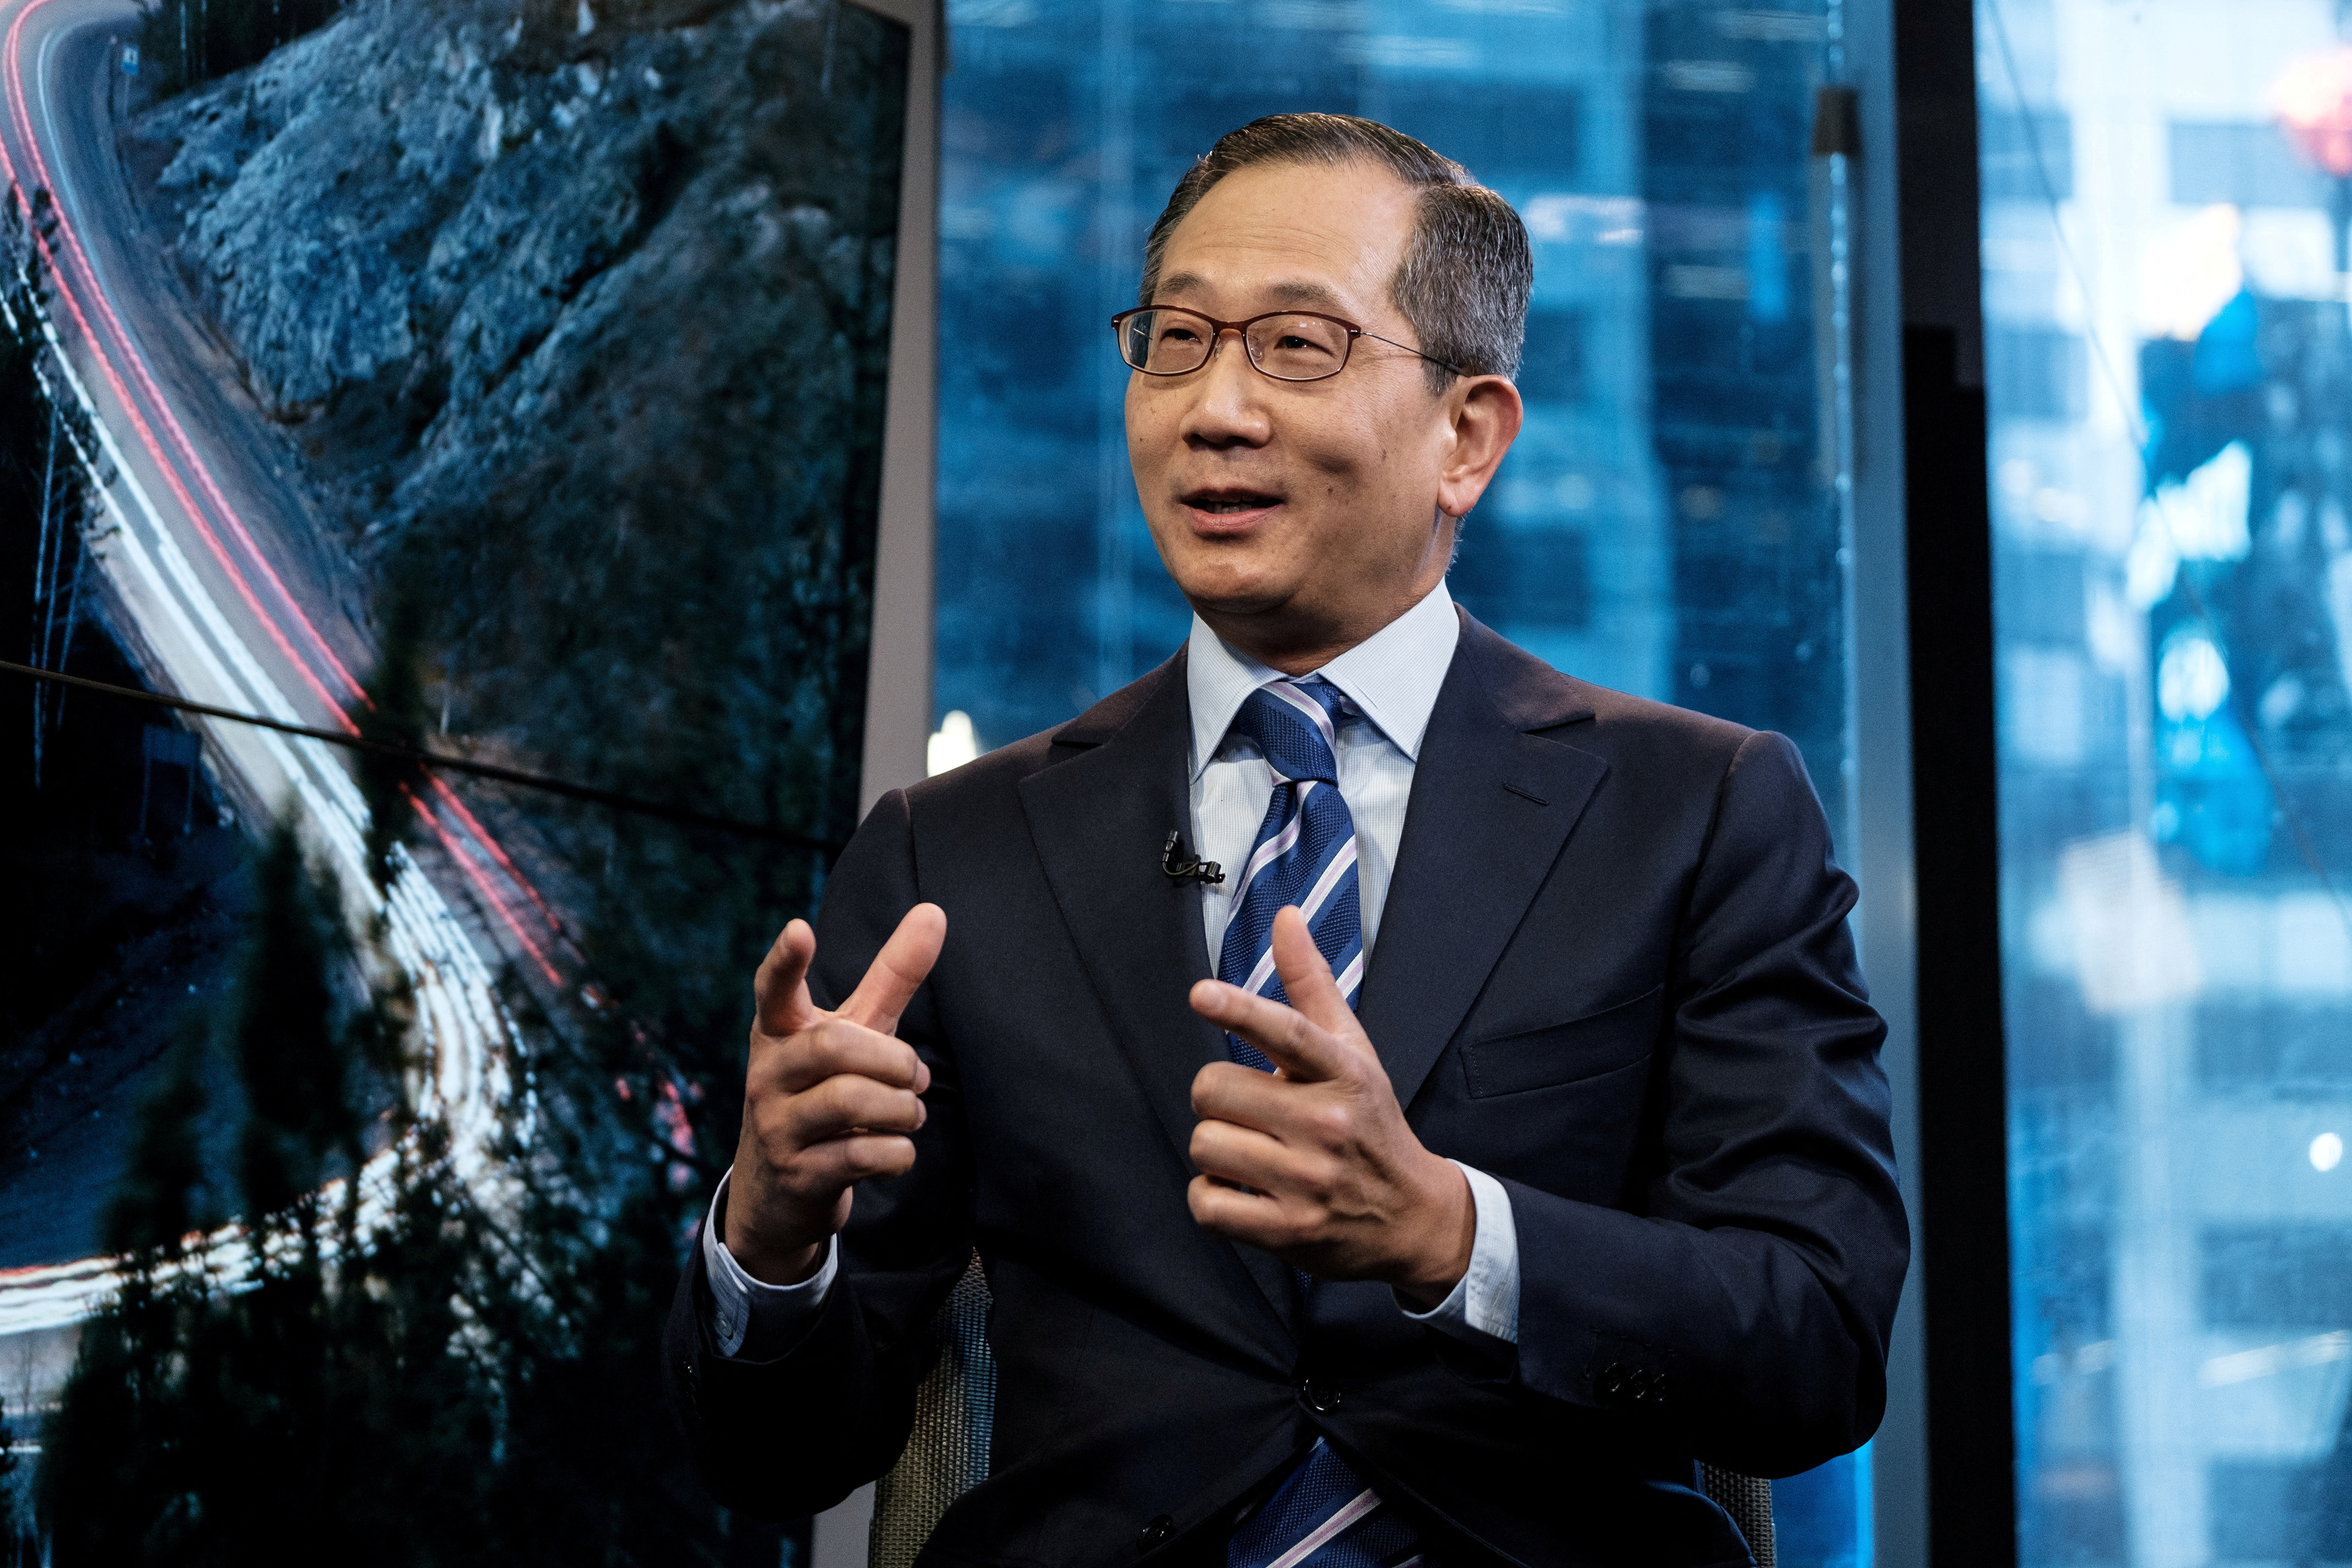 Carlyle Group CEO Kewsong Lee speaks during a Reuters Newsmaker event in New York